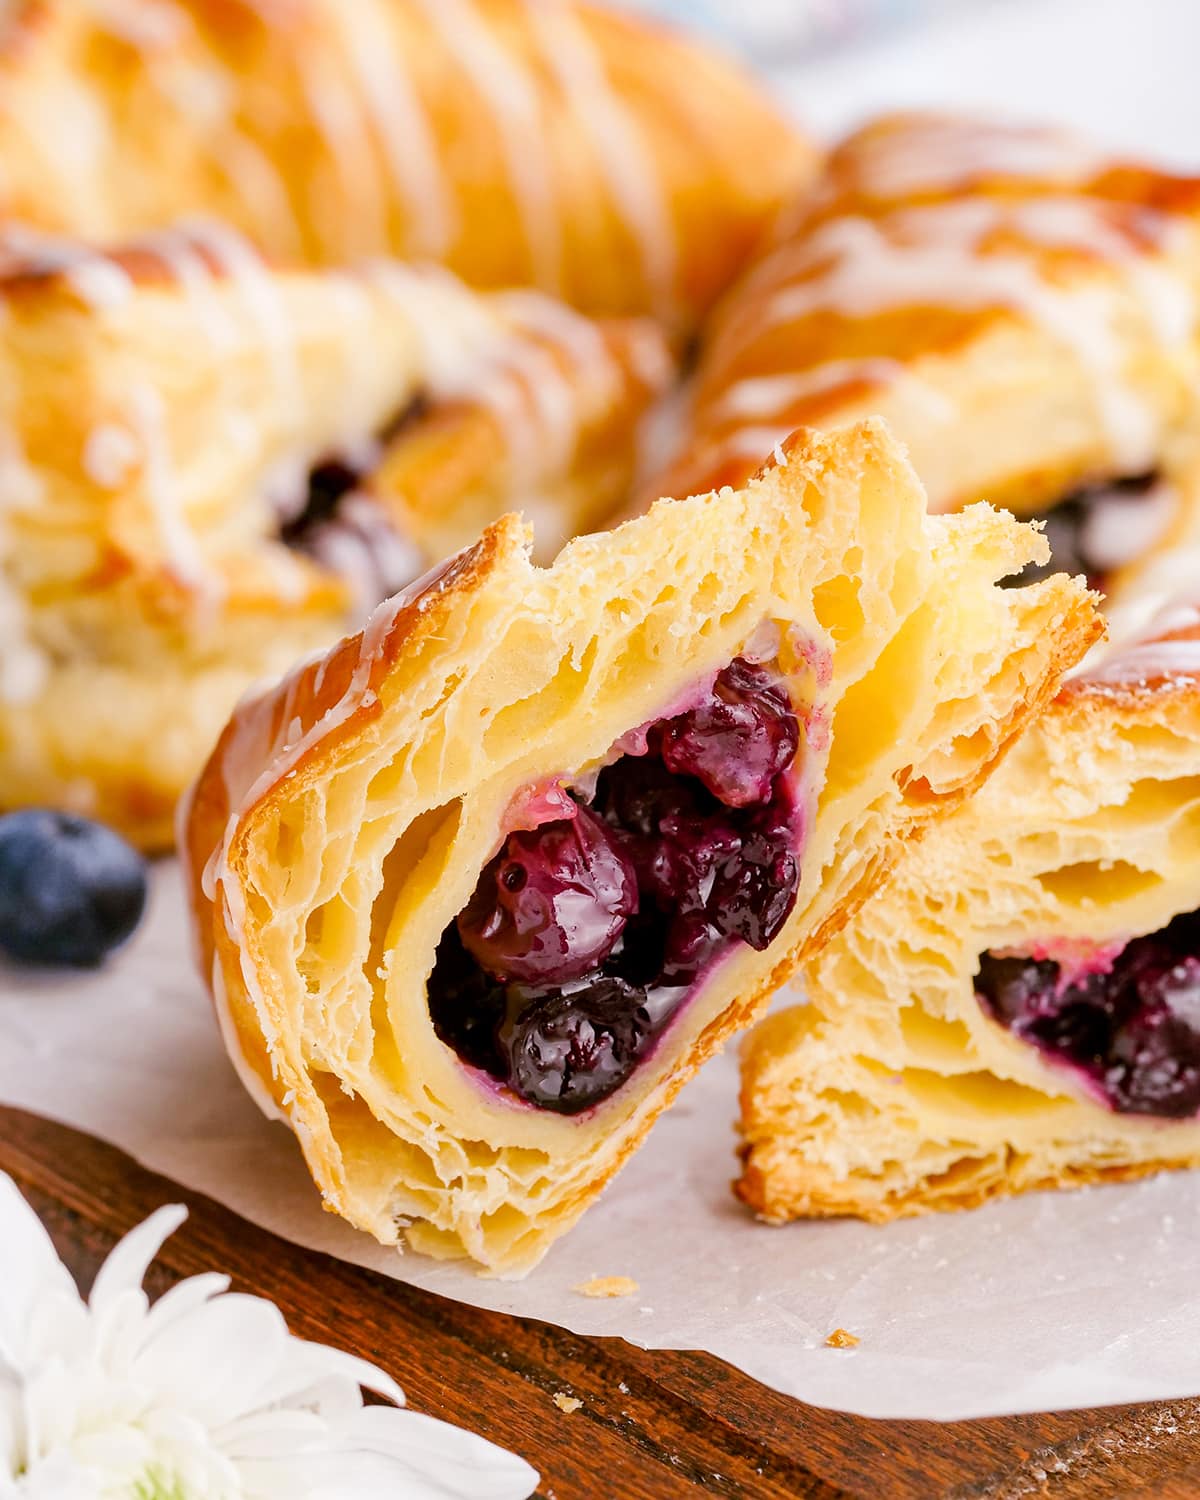 A blueberry turnover cut in half to show the flaky layers, and the blueberry filling.